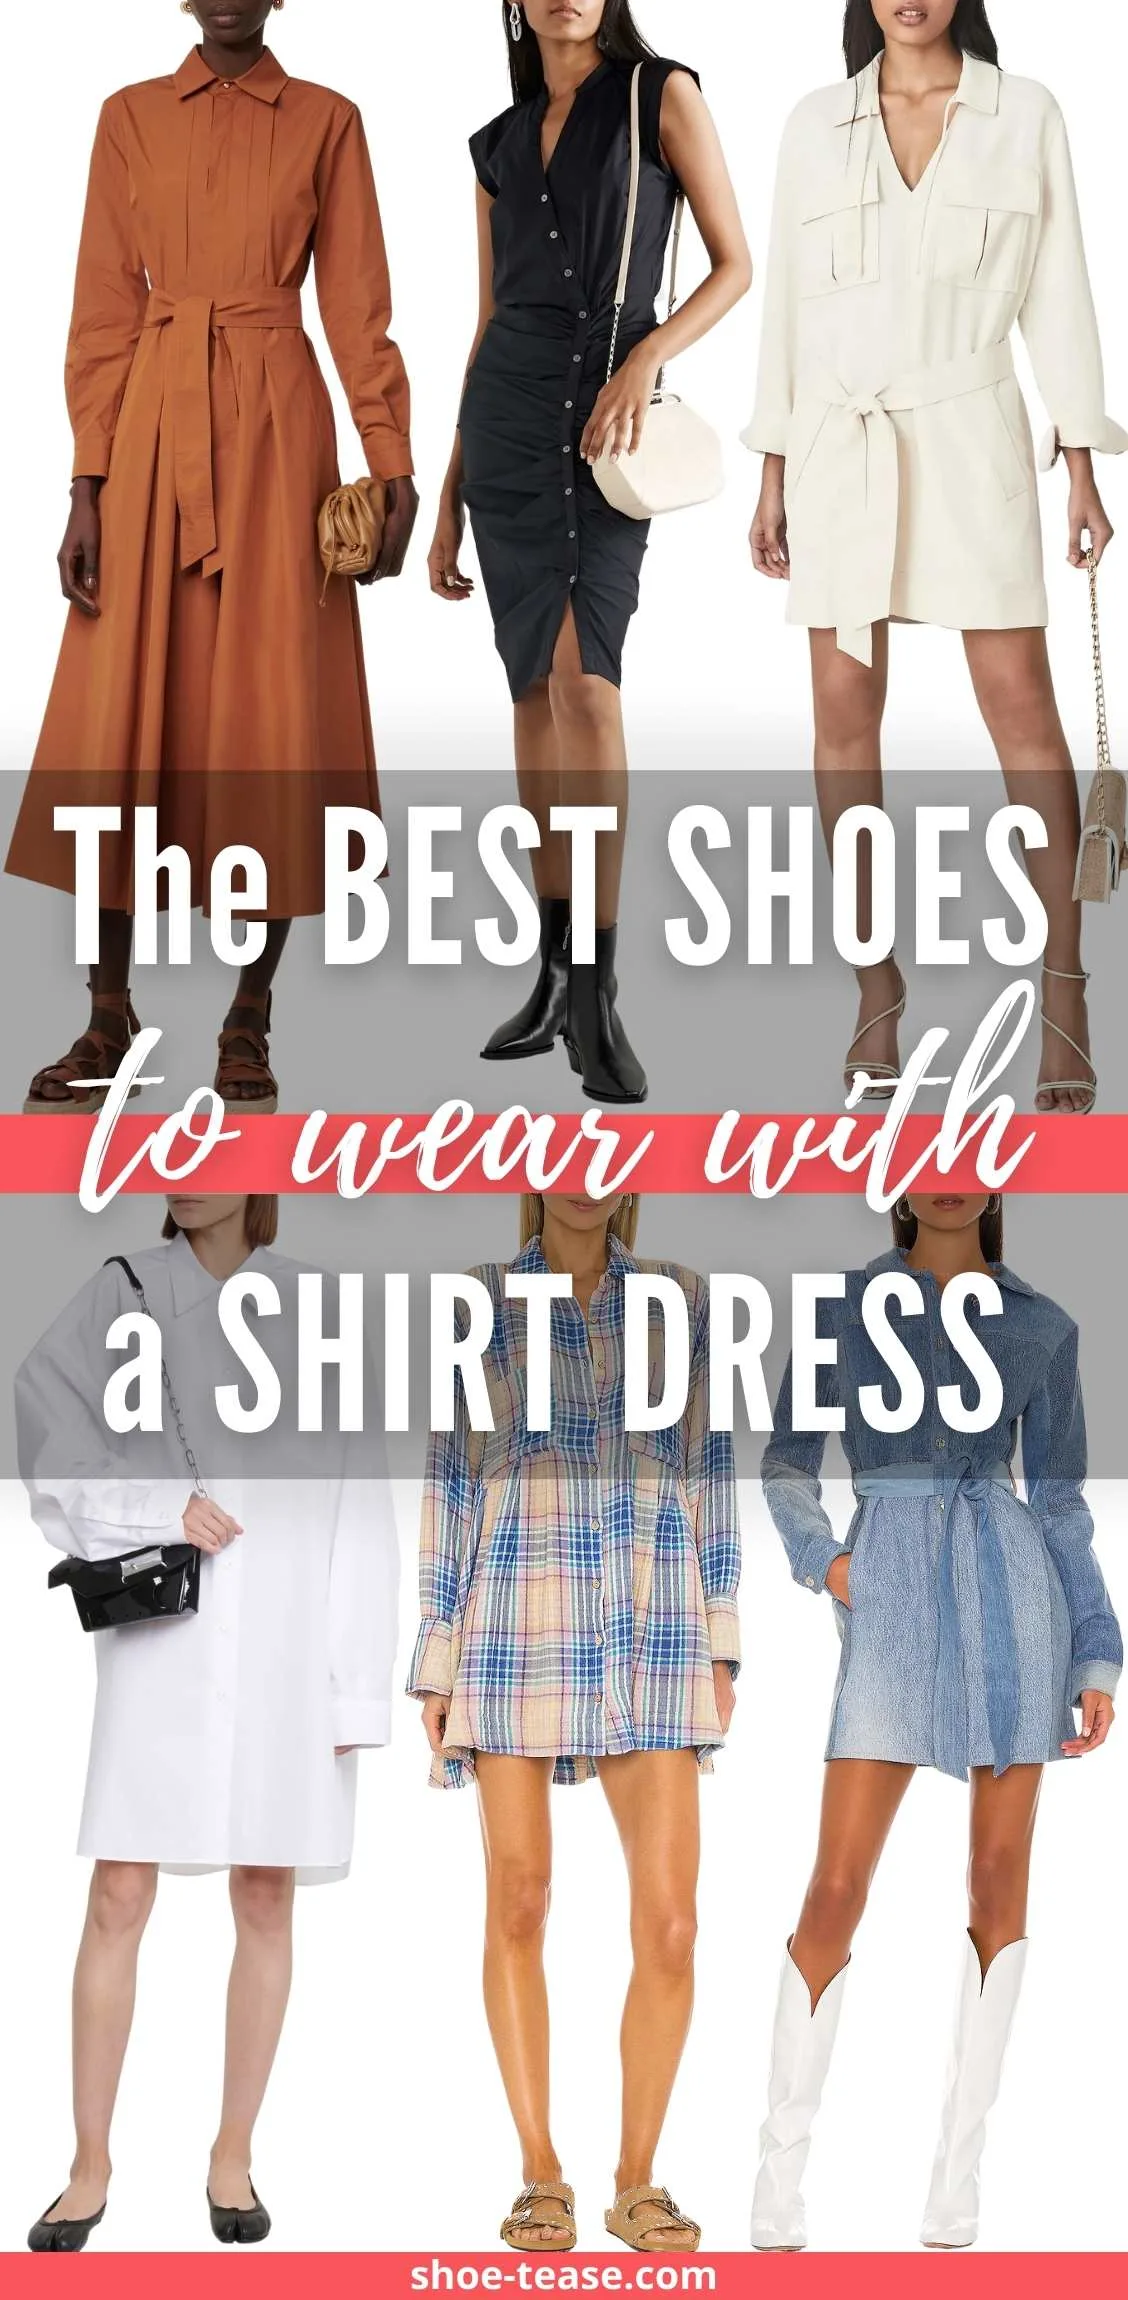 Text reading the best shoes to wear with a shirt dress over collage of 6 women wearing different shirt dress outfits.